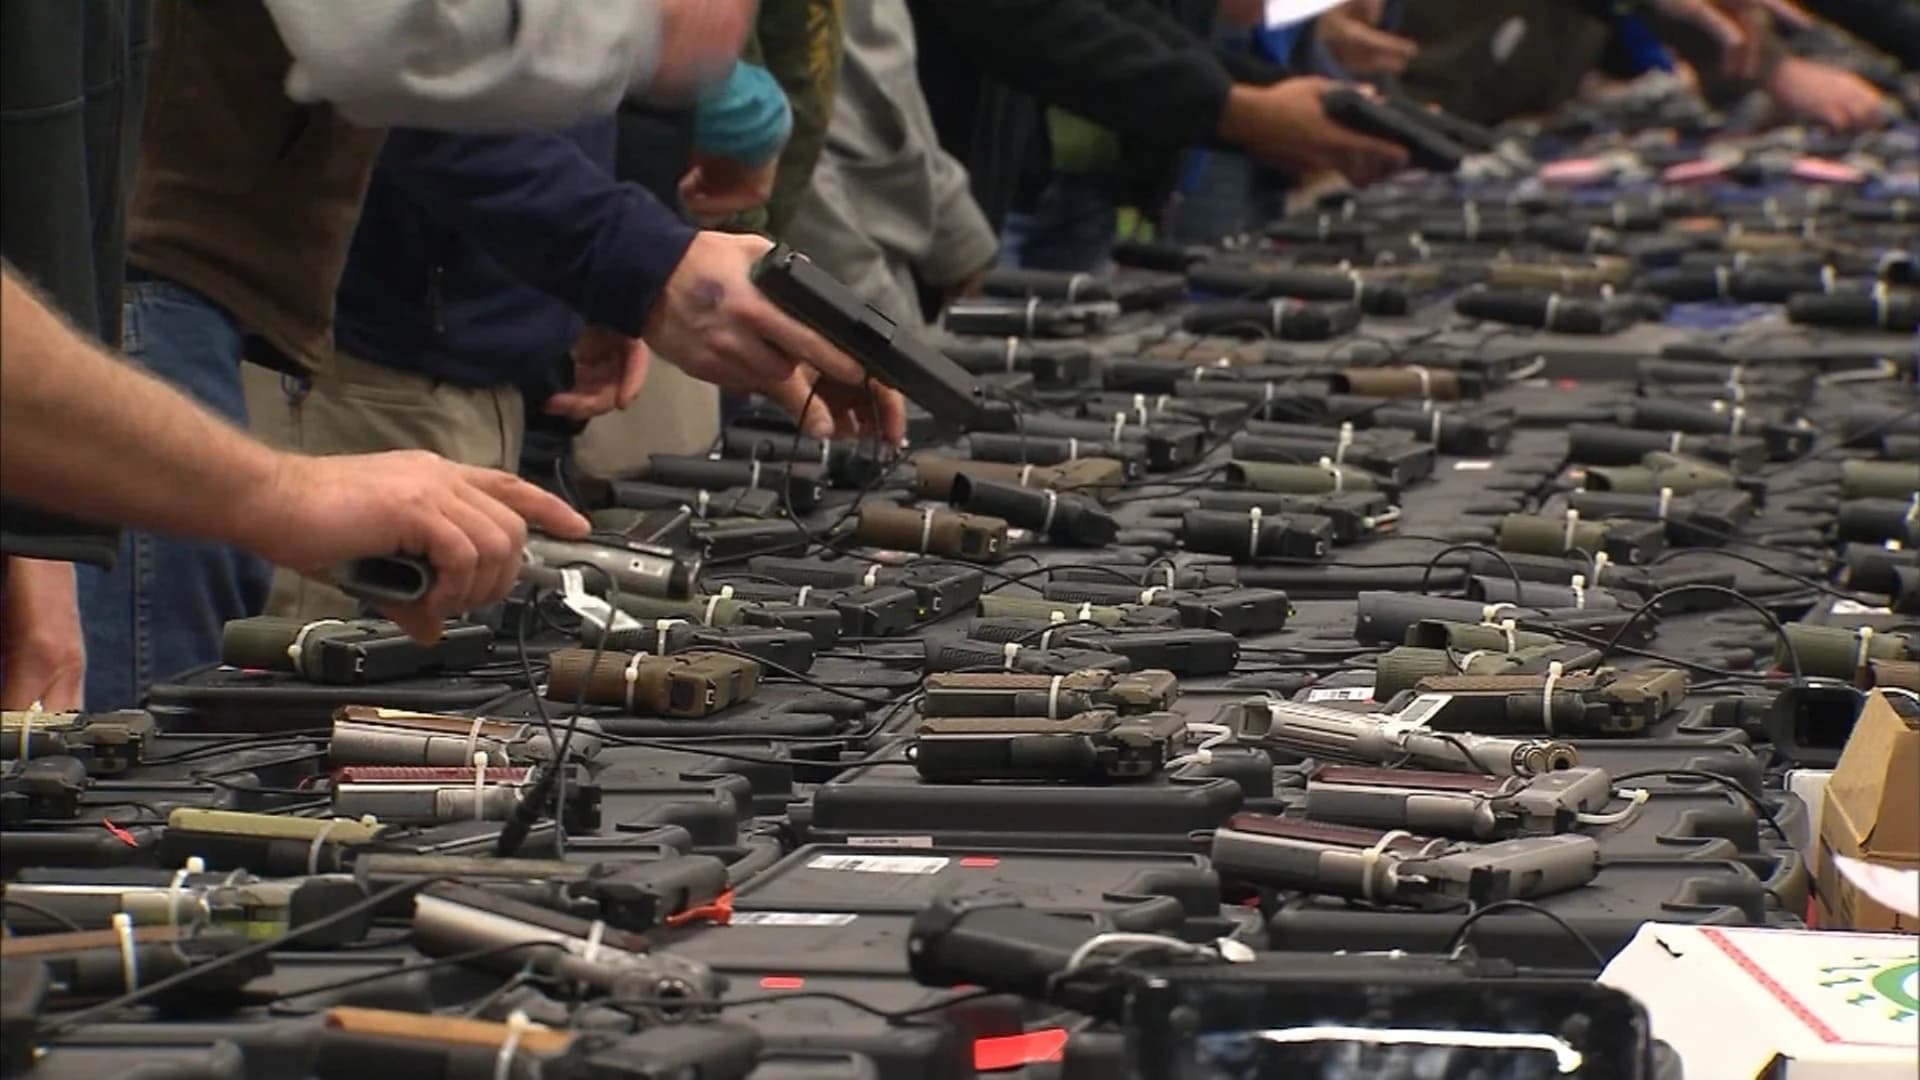 Gun rights group files lawsuit challenging ammo provision enacted after Sandy Hook